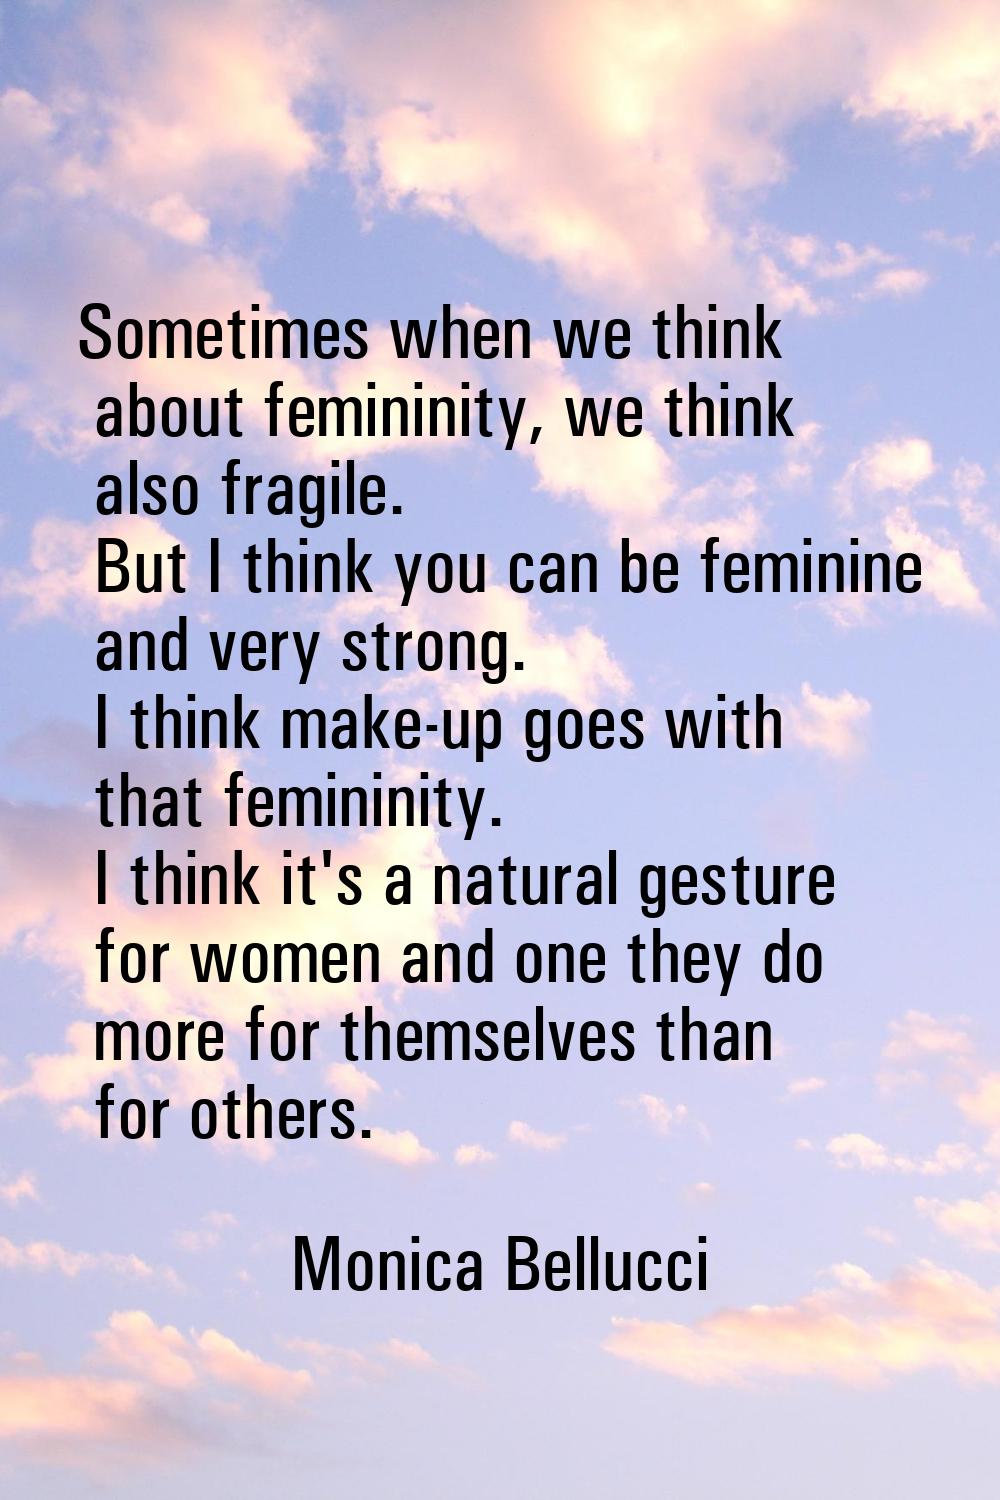 Sometimes when we think about femininity, we think also fragile. But I think you can be feminine an